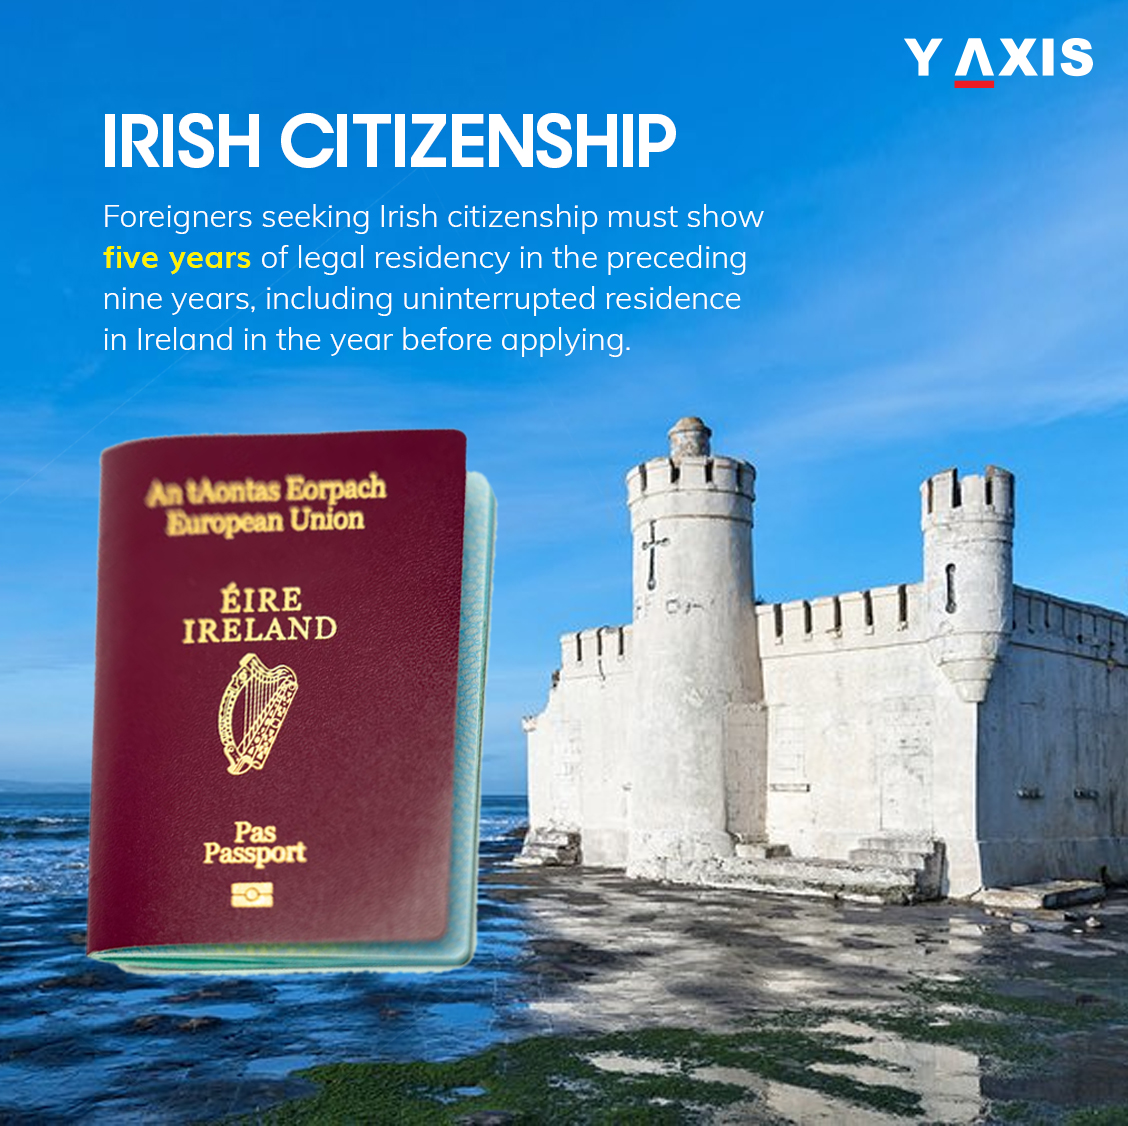 Dreaming of Irish Citizenship? With just five years of legal residency, you can make it a reality! Enjoy the charm of Ireland and its vibrant culture.

y-axis.com/visa/work/irel…

🌍🍀 #IrishCitizenship #LiveInIreland #YAxis #YAxisimmigration